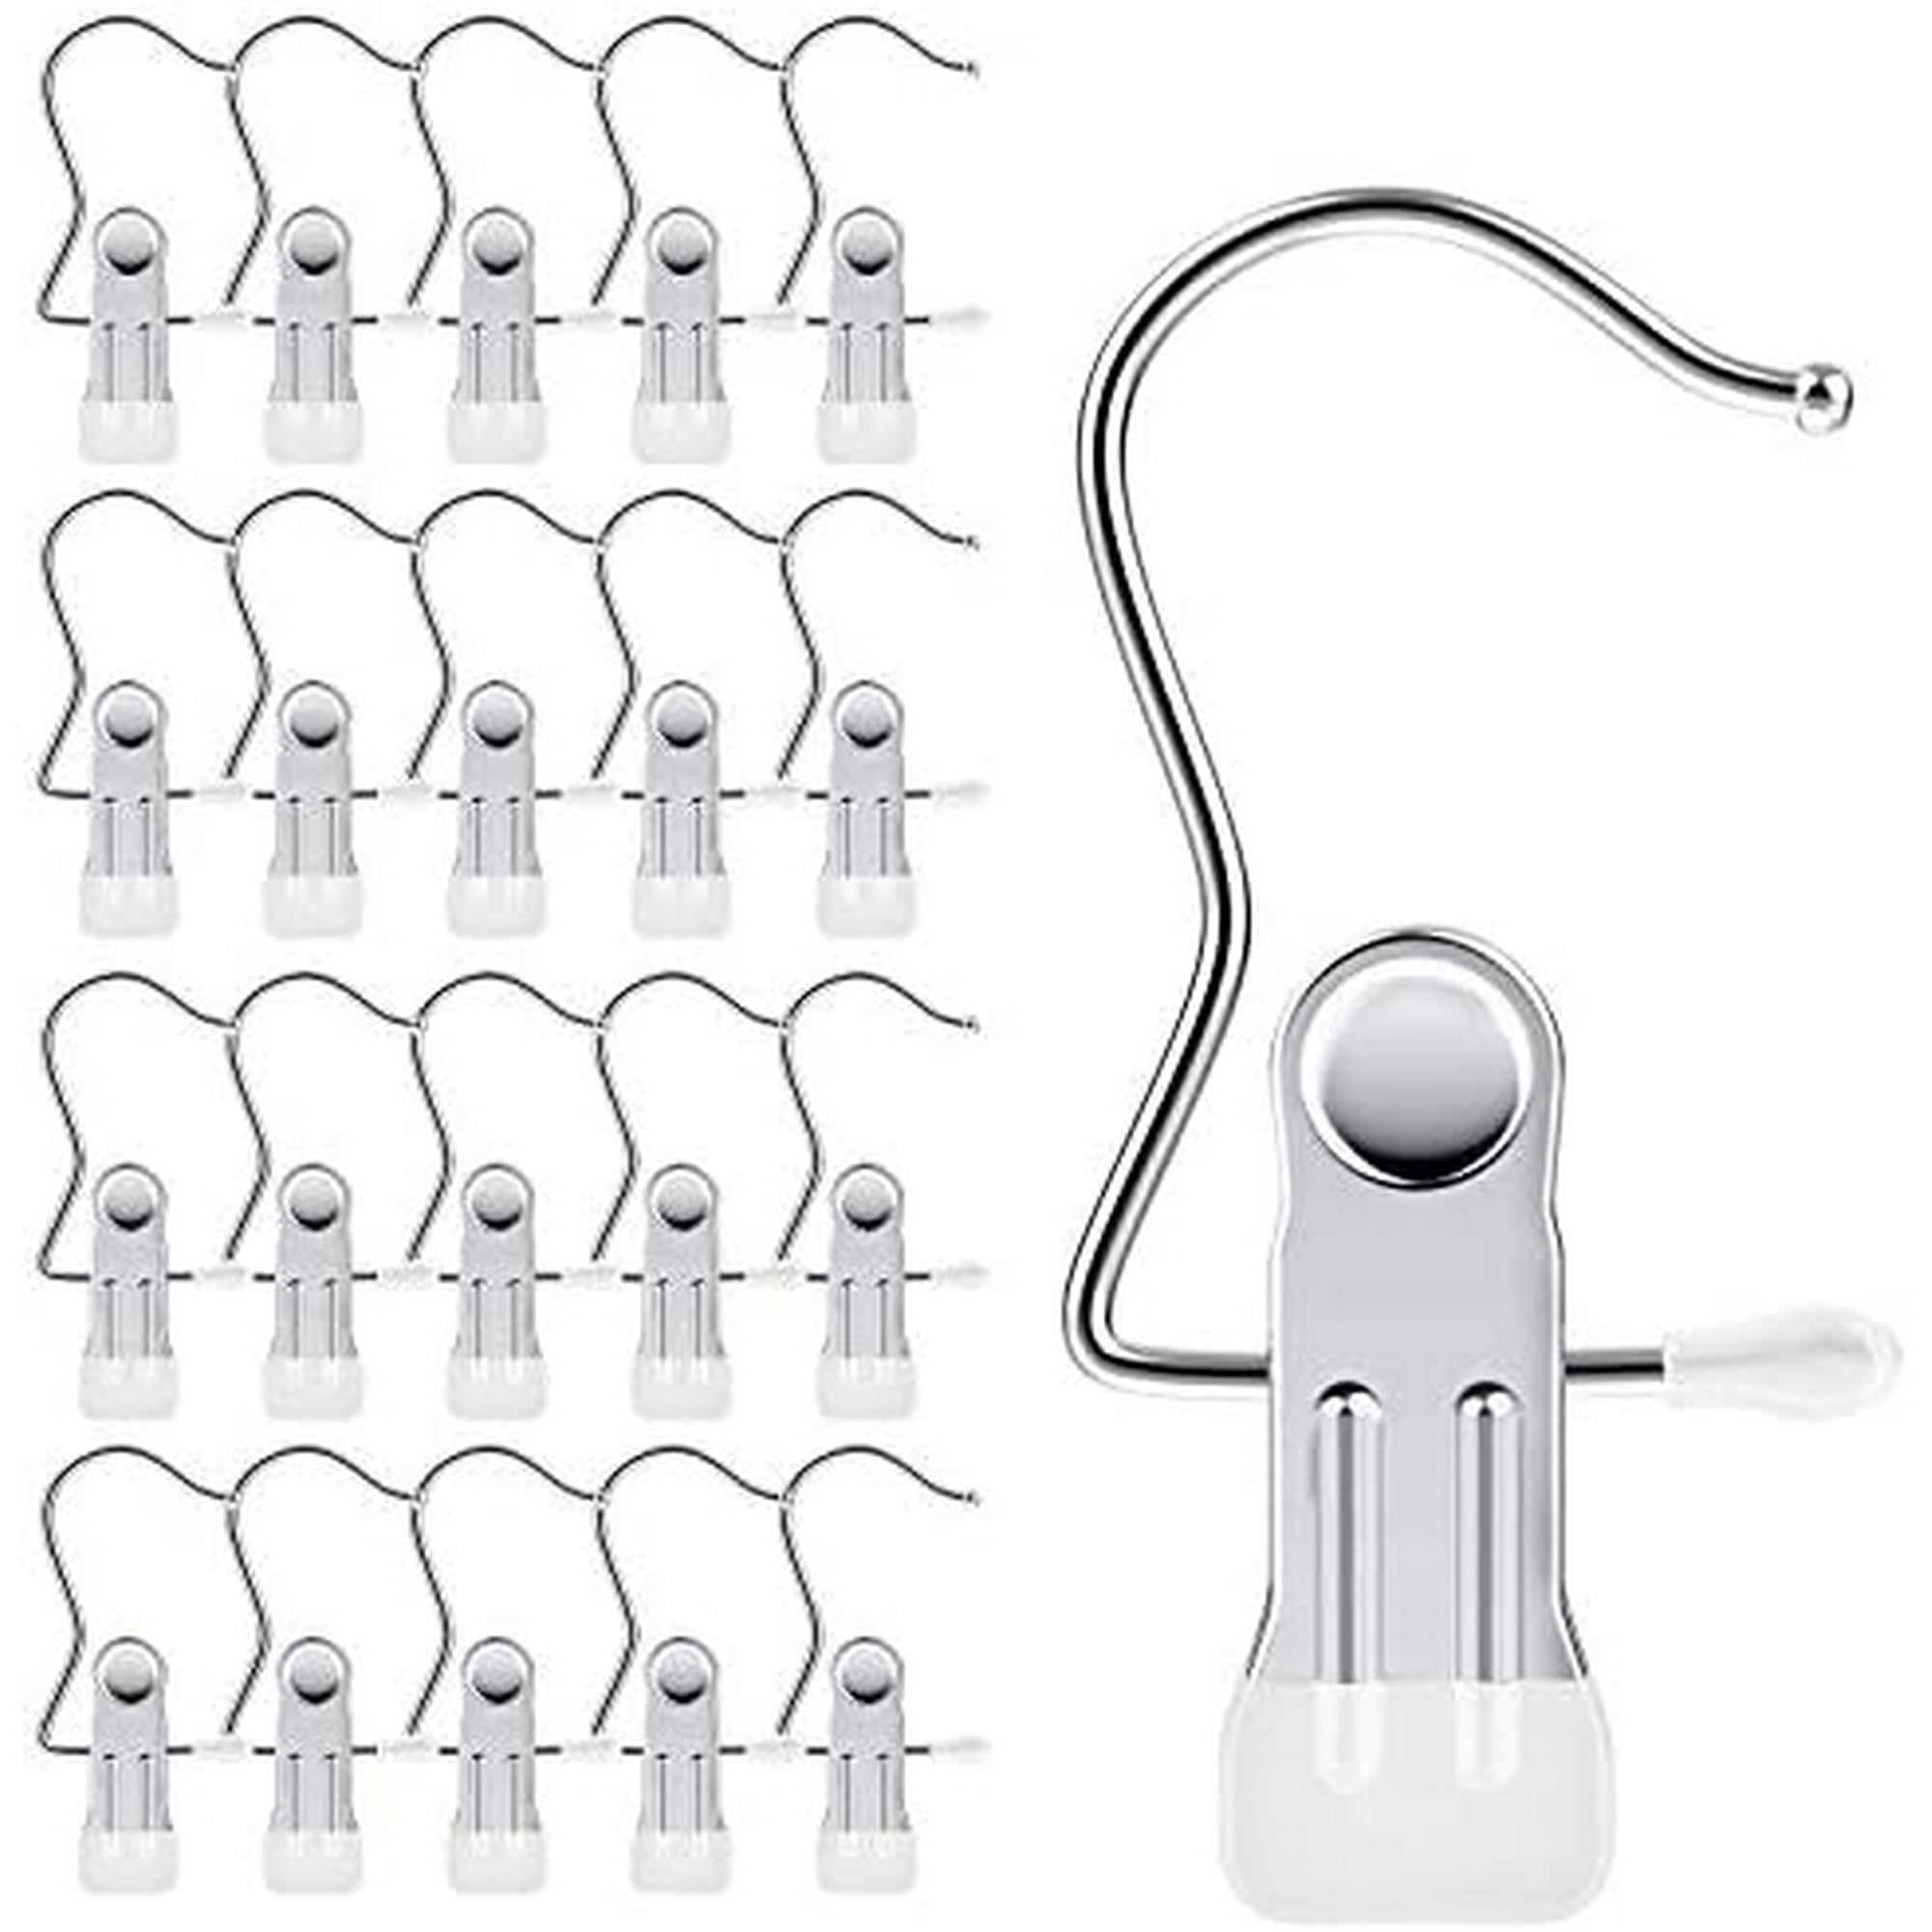 10x Portable Metal Hook Laundry Clothes Pin Boot Shoes Pants Hanger Hold Clips